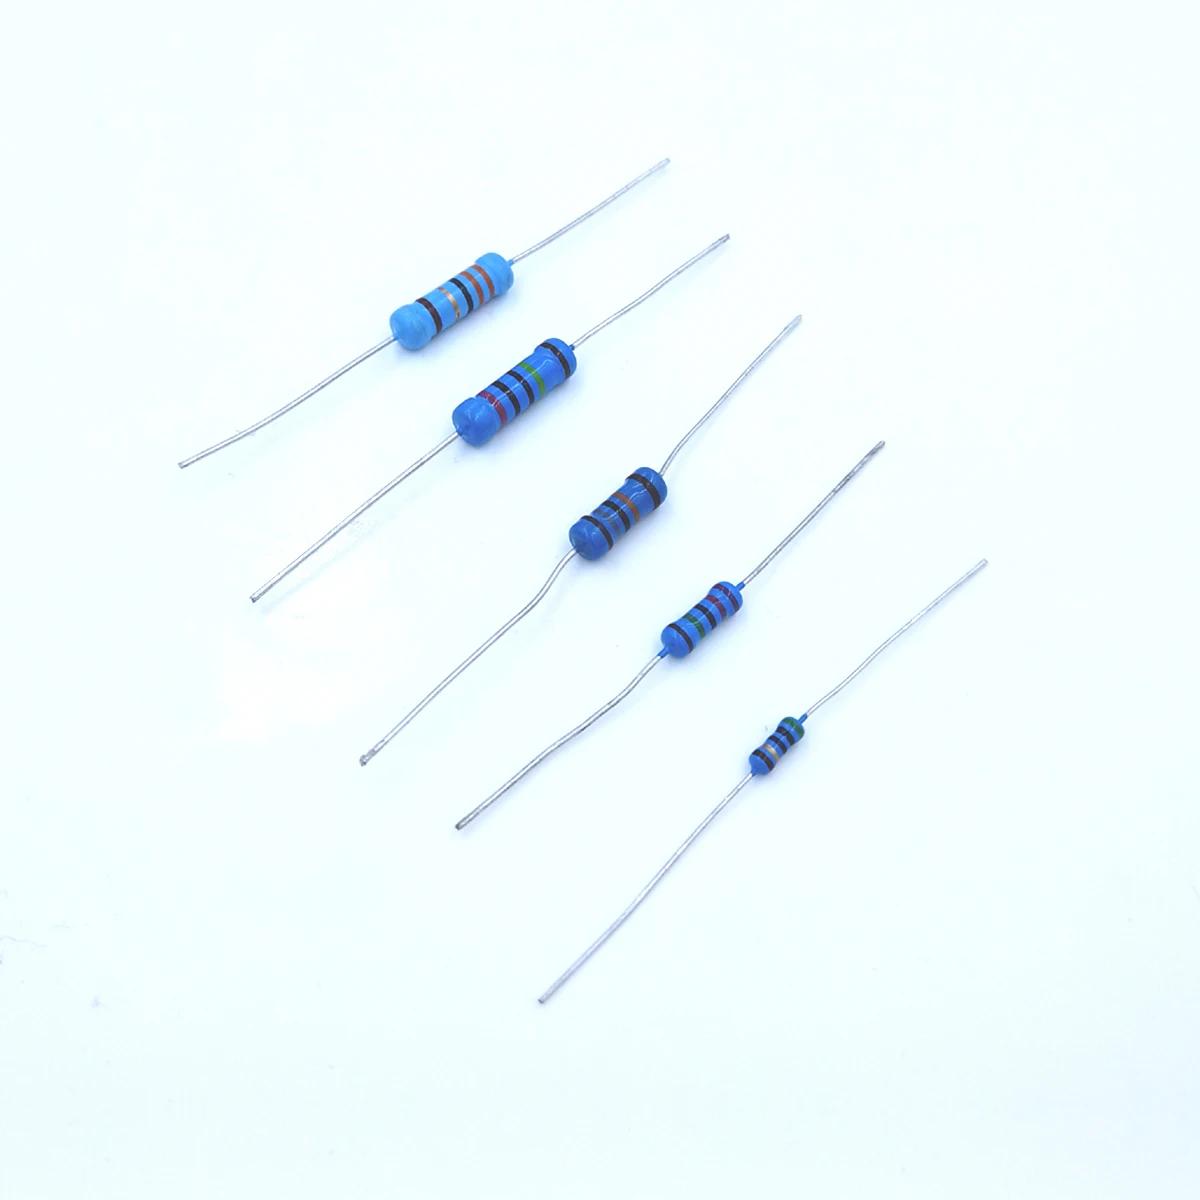 

100Pcs 1R 1.1R 1.2R 1.3R 1Ohm 1.1Ohm 1.2Ohm 1.3Ohm 1 1.1 1.2 1.3 R Ohm 1/4W 1% Metal Film Resistor Colored ring Resistance